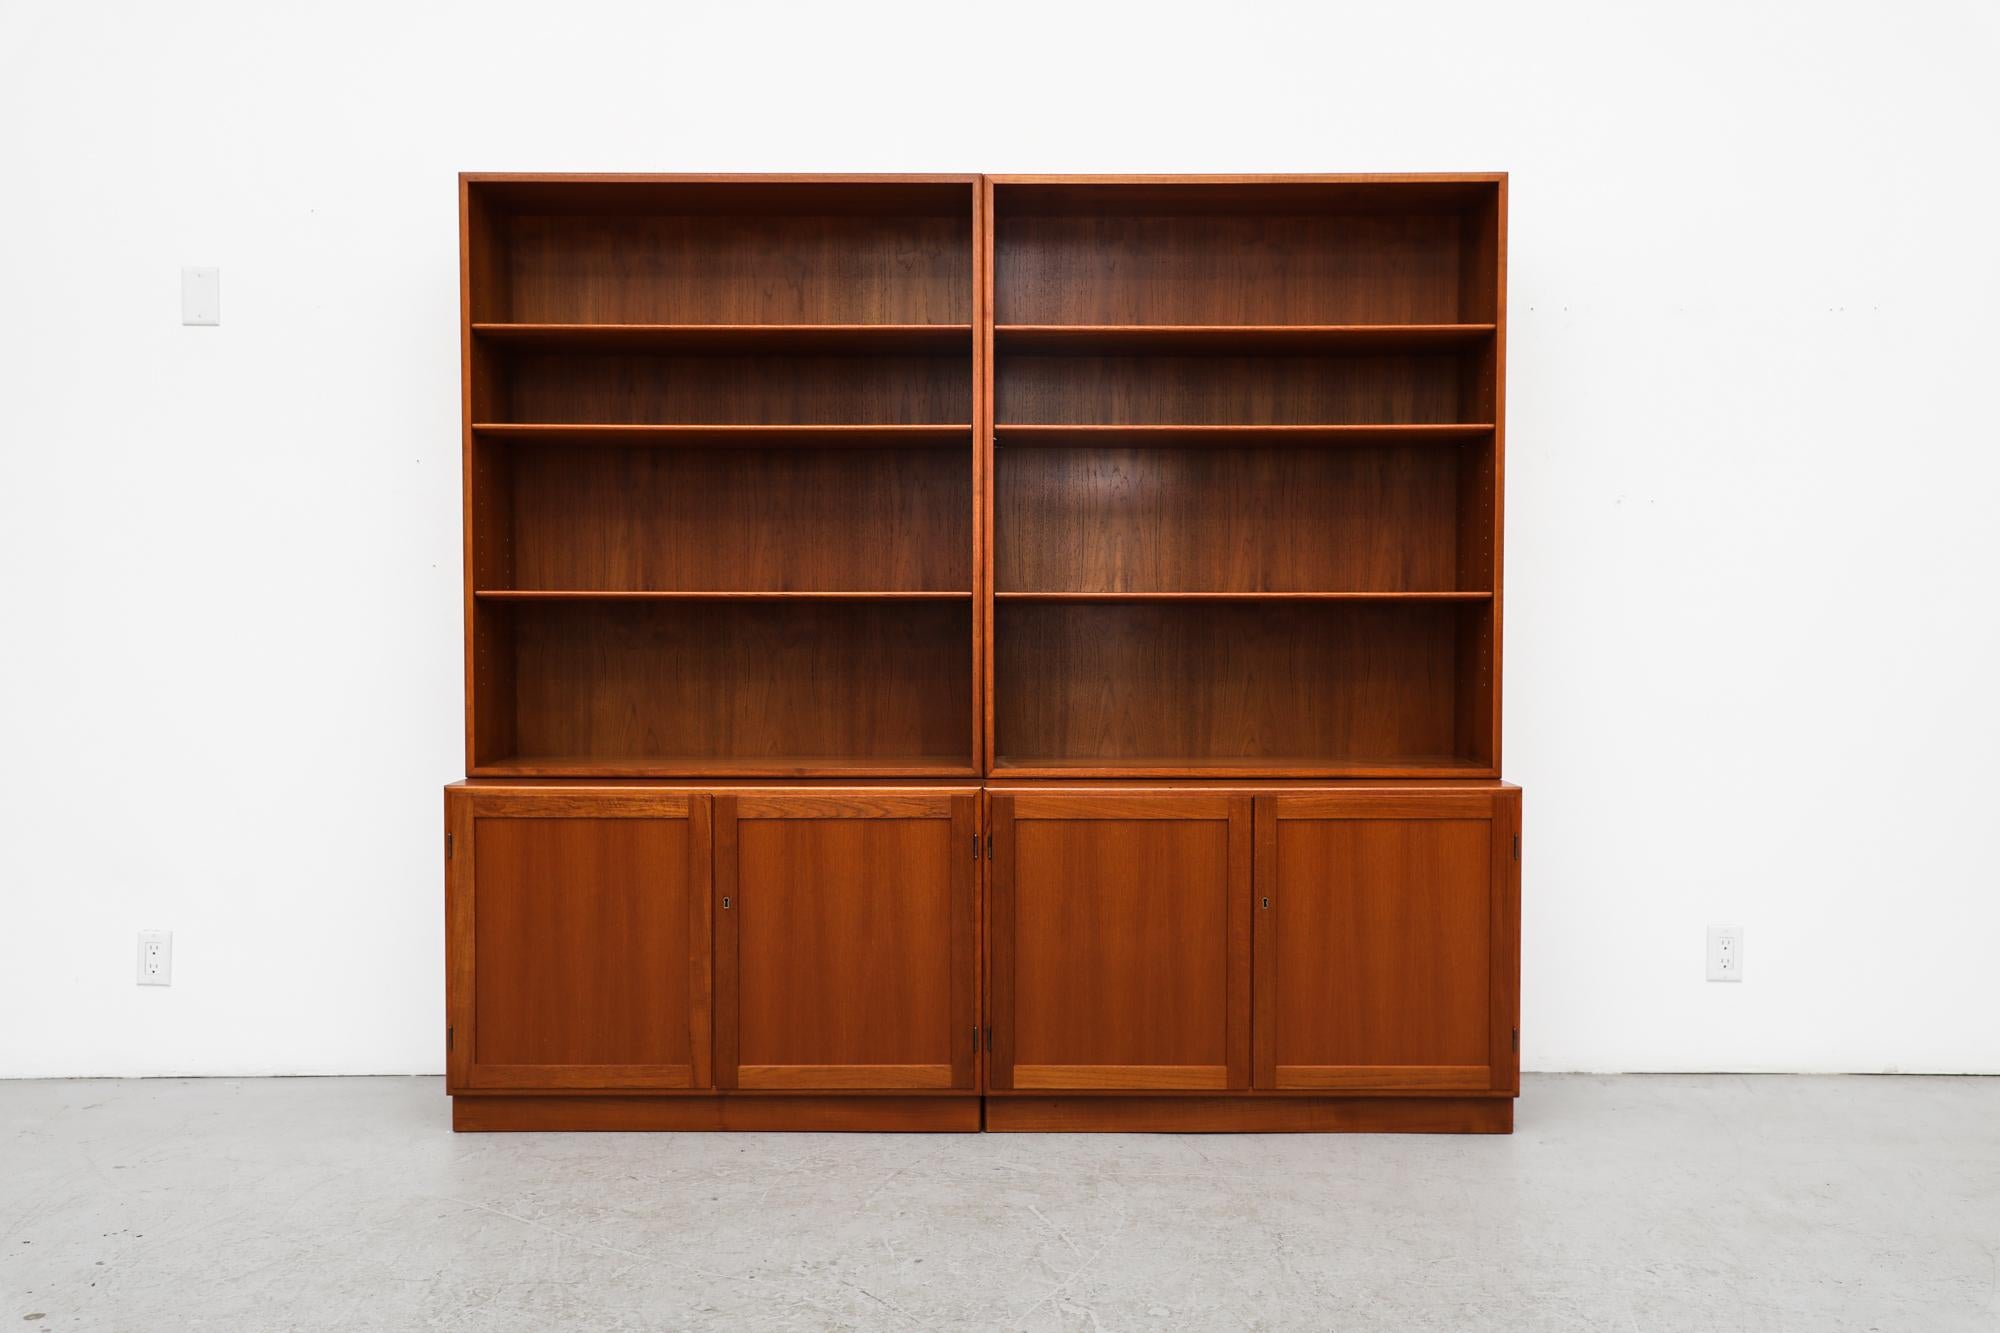 Two 1960s Danish teak bookcases with lower storage cabinets by Søborg Møbelfabrik. Each unit has an upper piece that sits on the wider, lower double door cabinet. Both cabinets have locking doors. One cabinet has a single little felt lined drawer